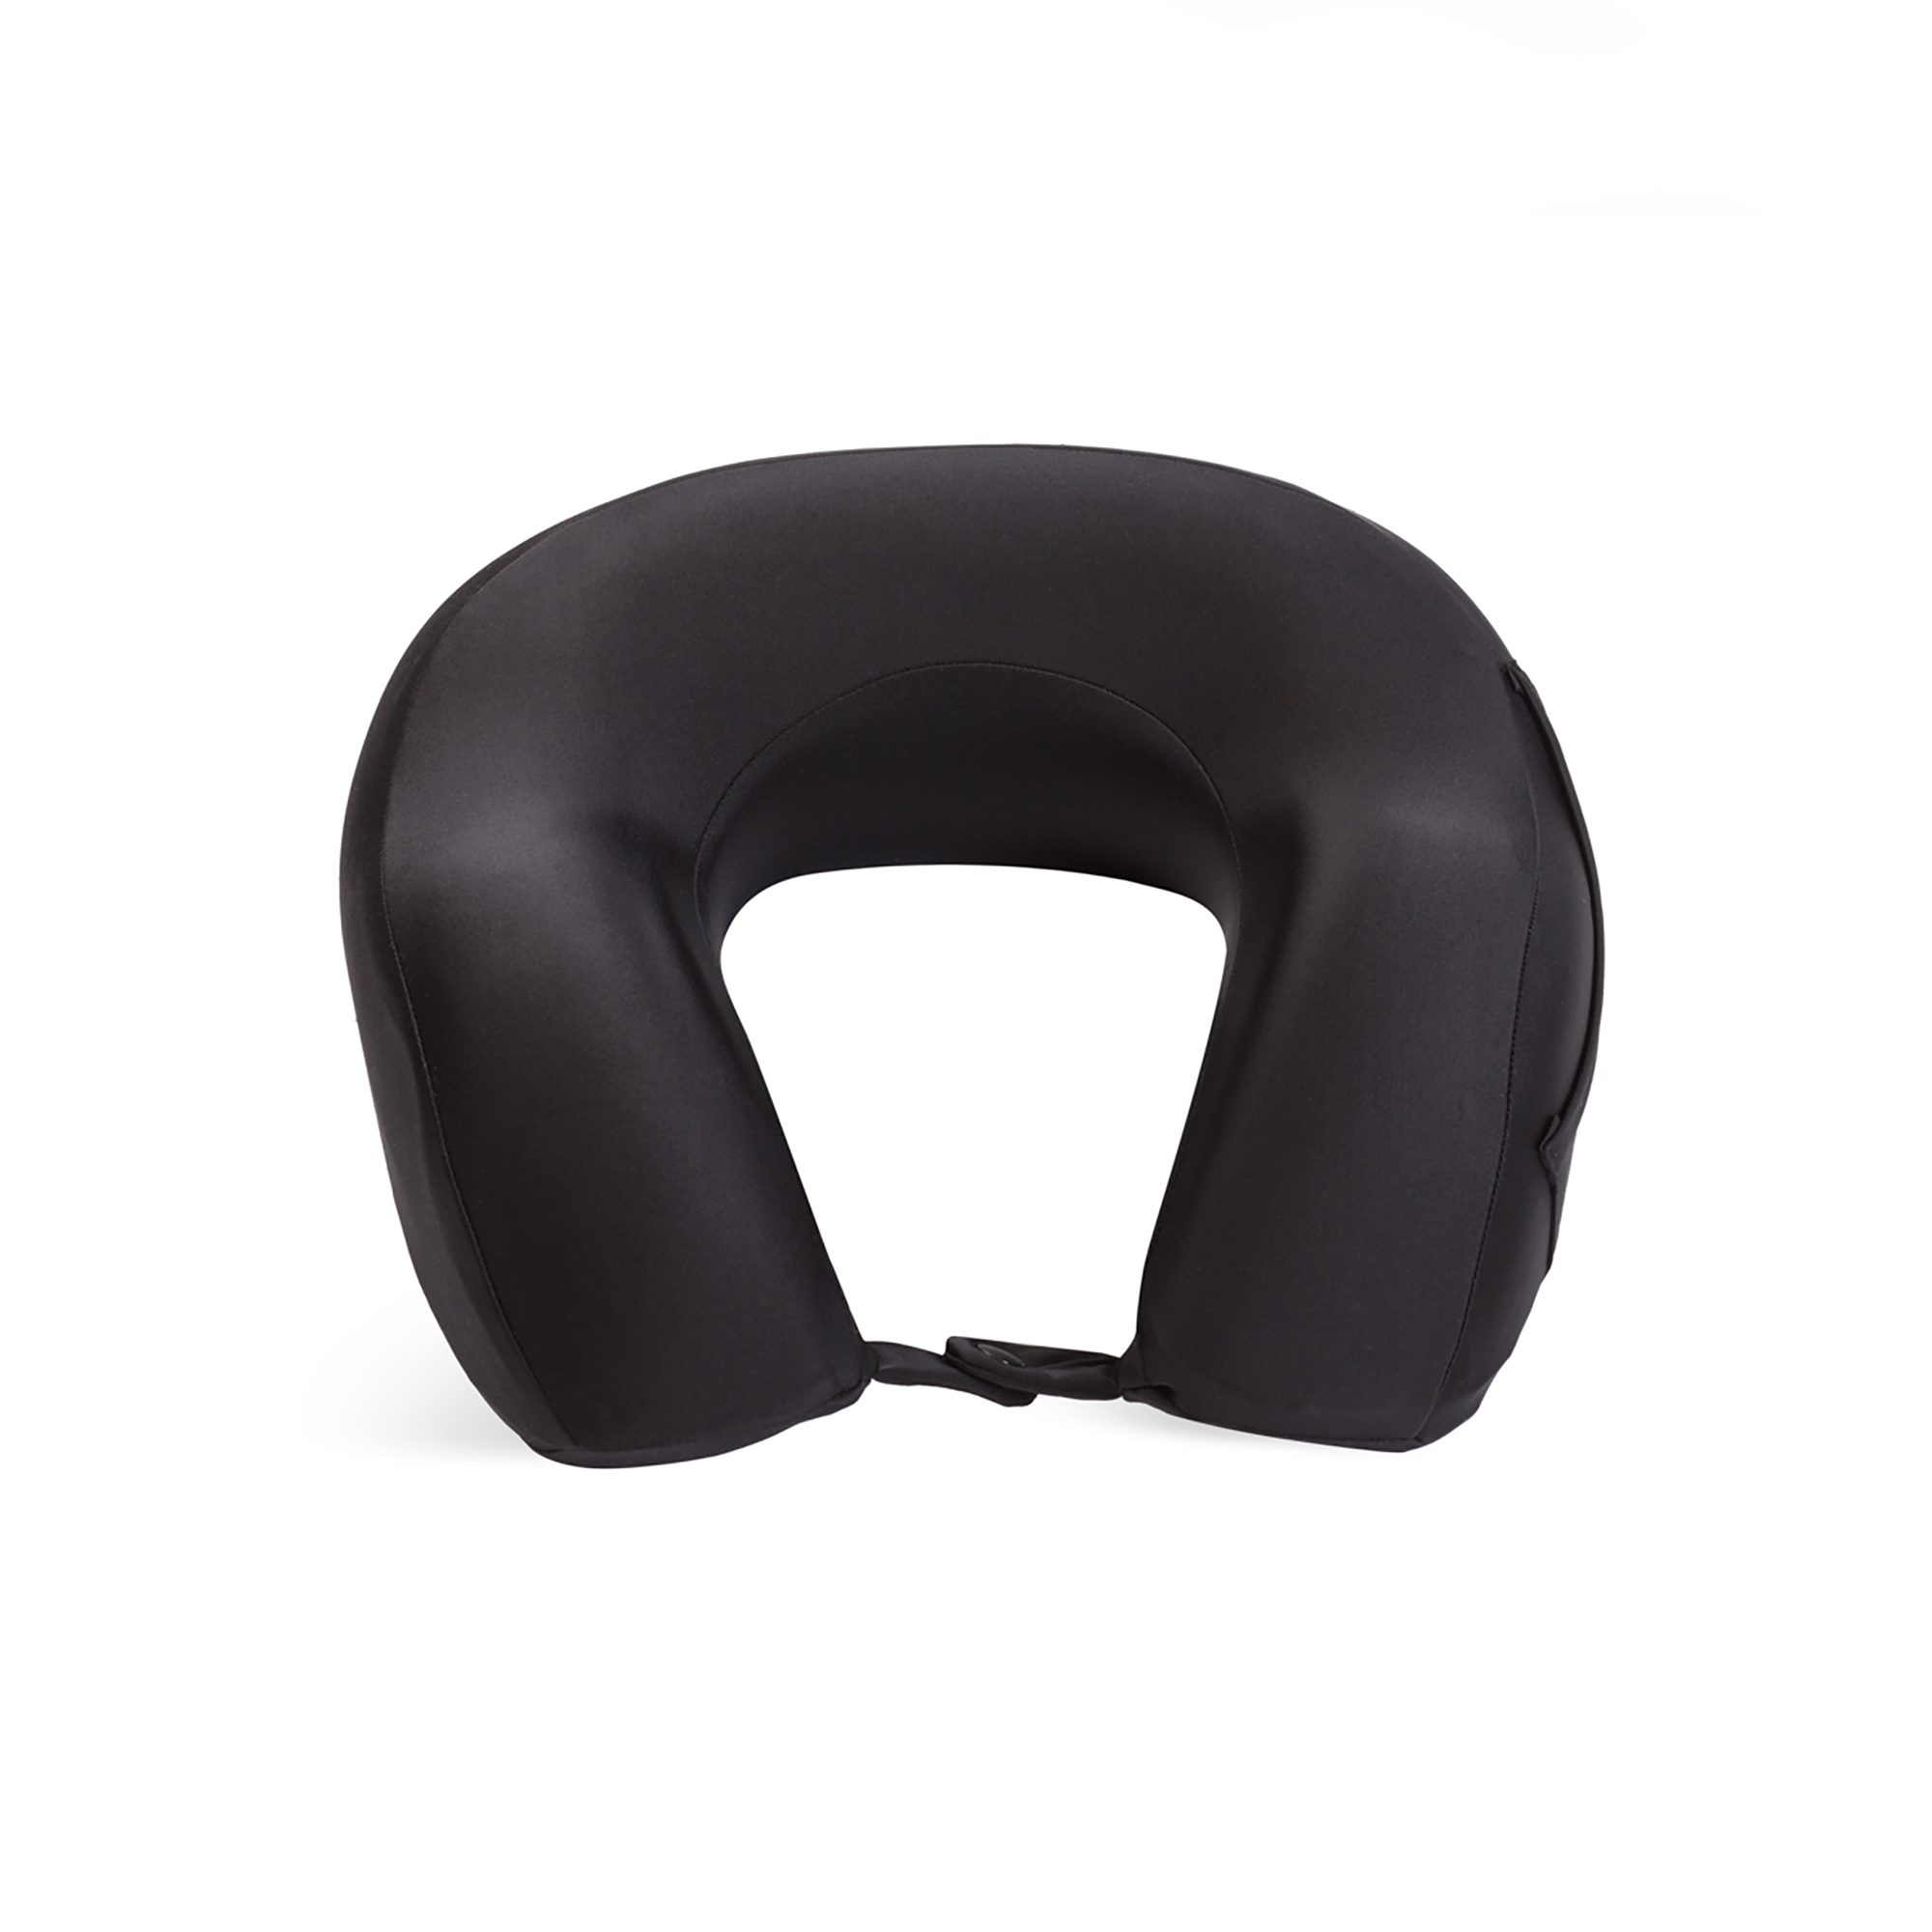 AT Cool Touch Memory Foam Travel Pillow - Black